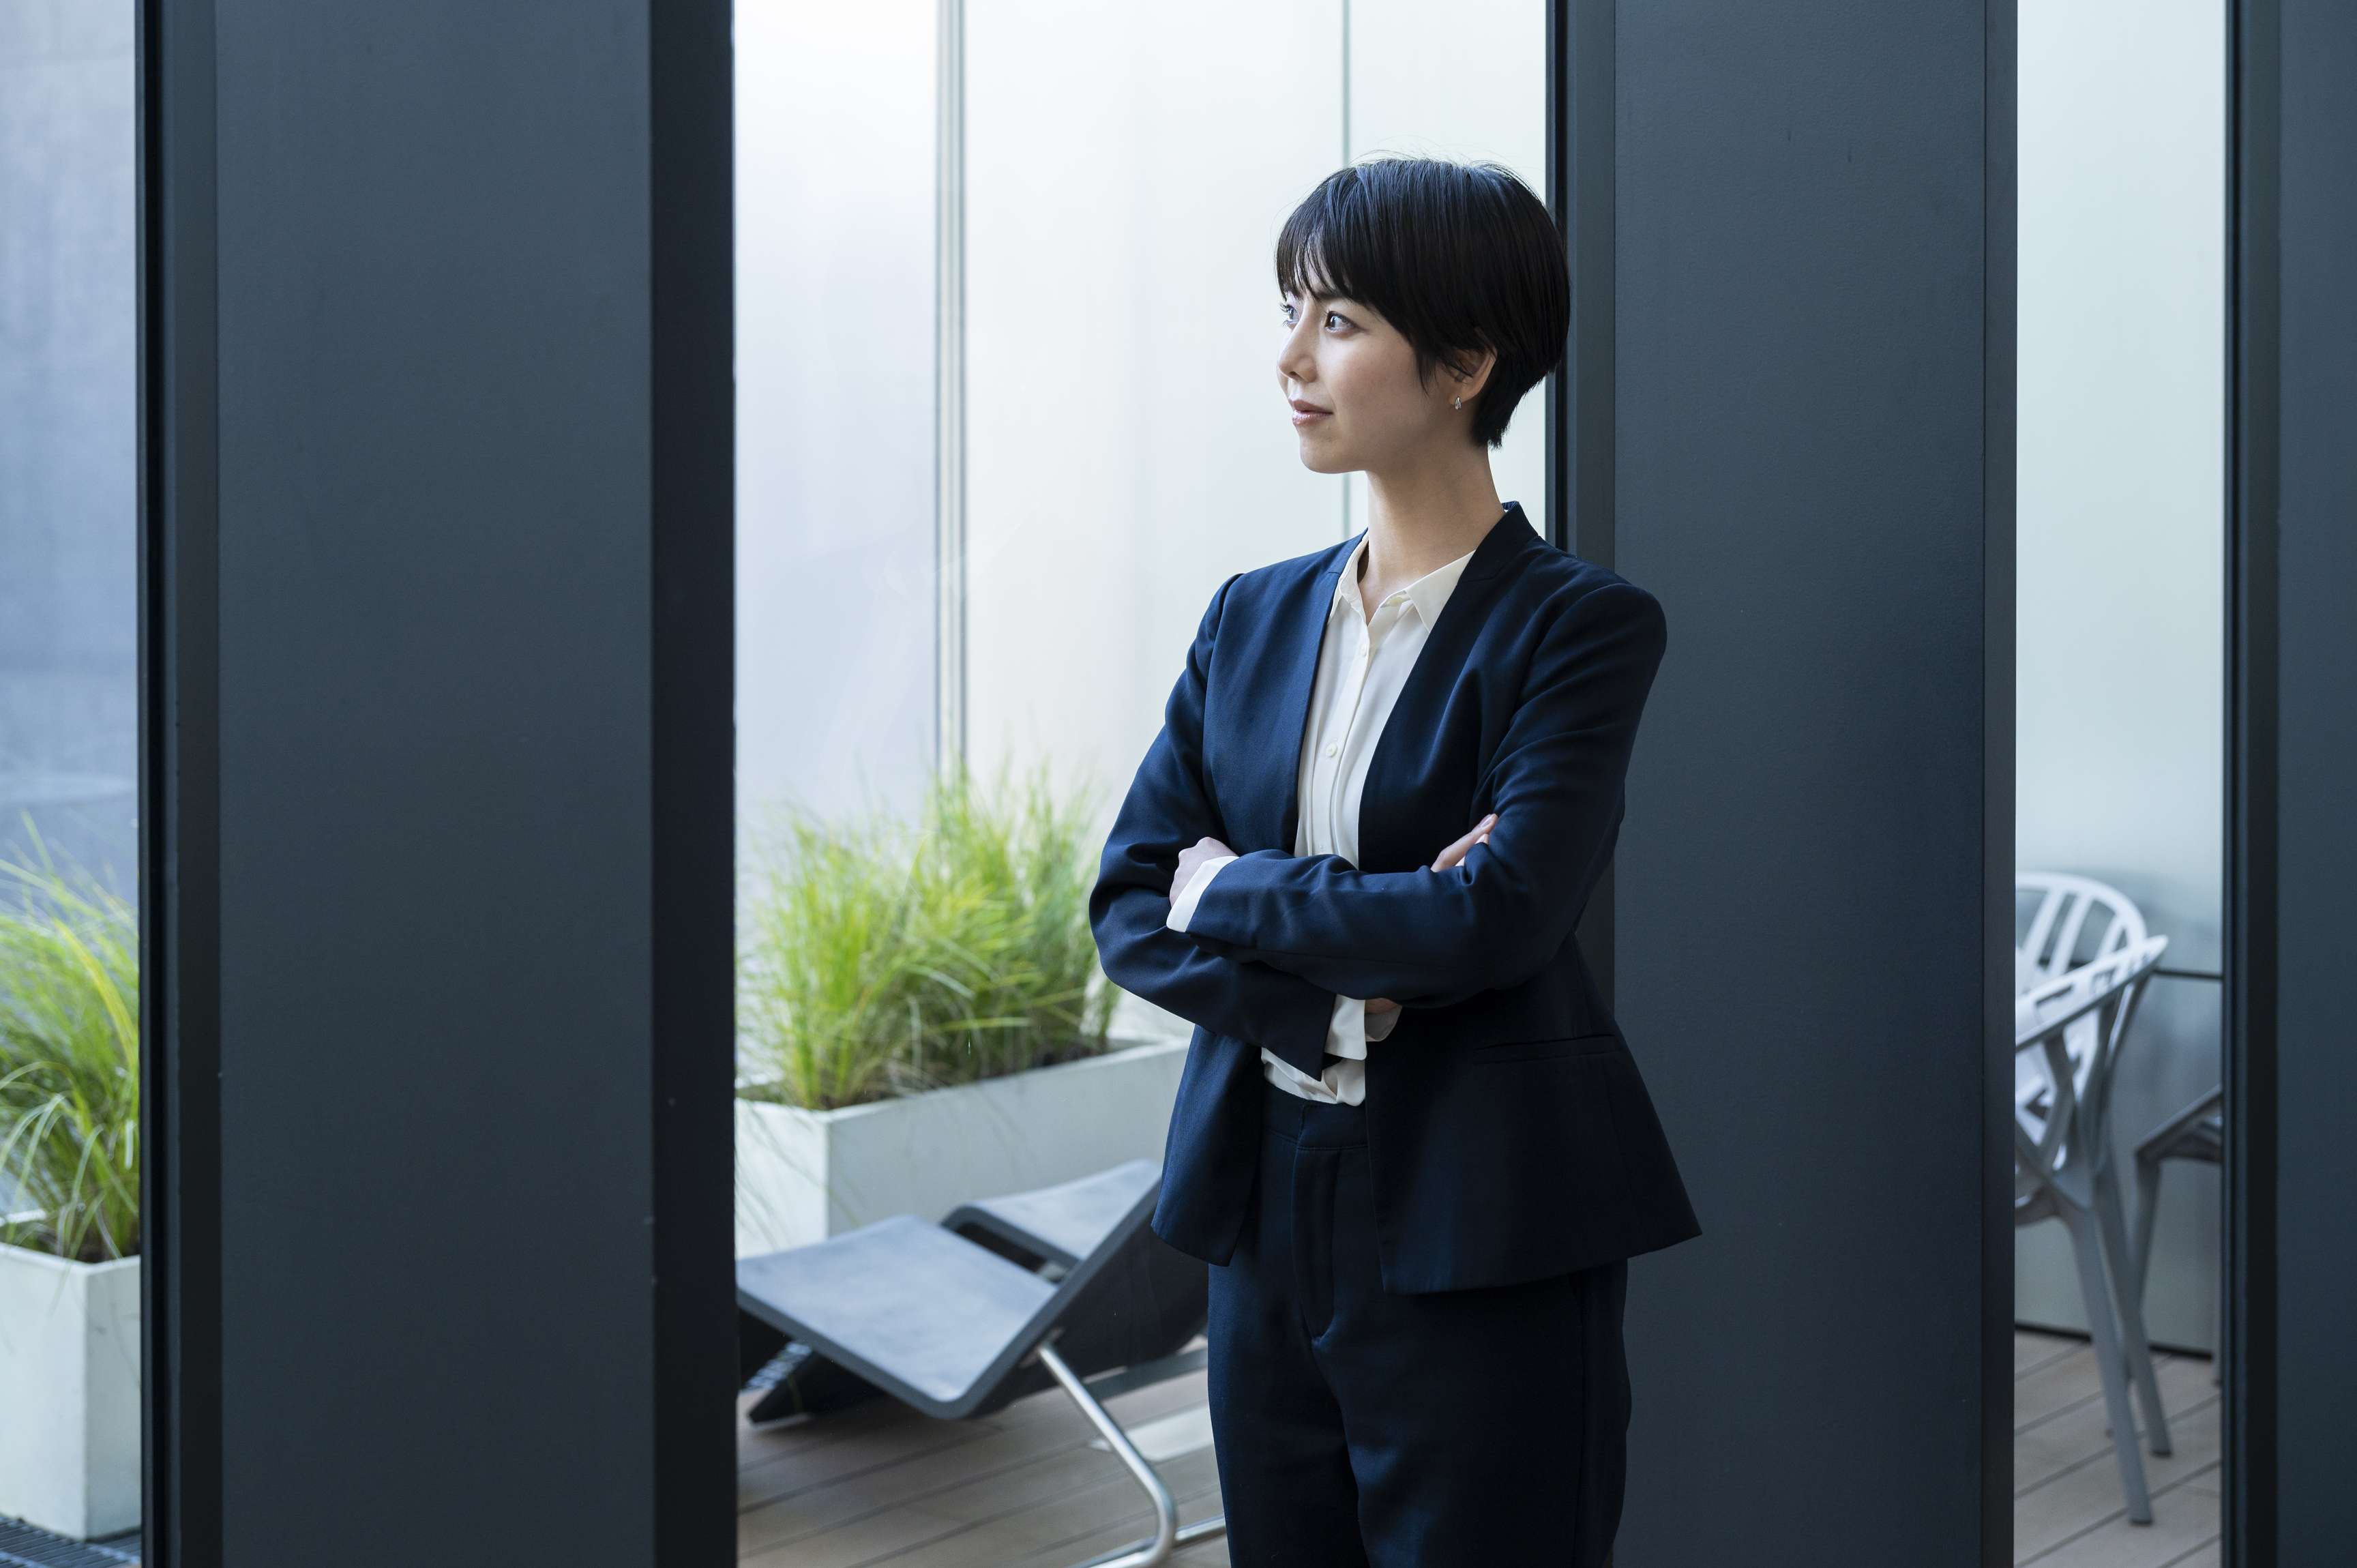 Woman in business attire standing in the office.